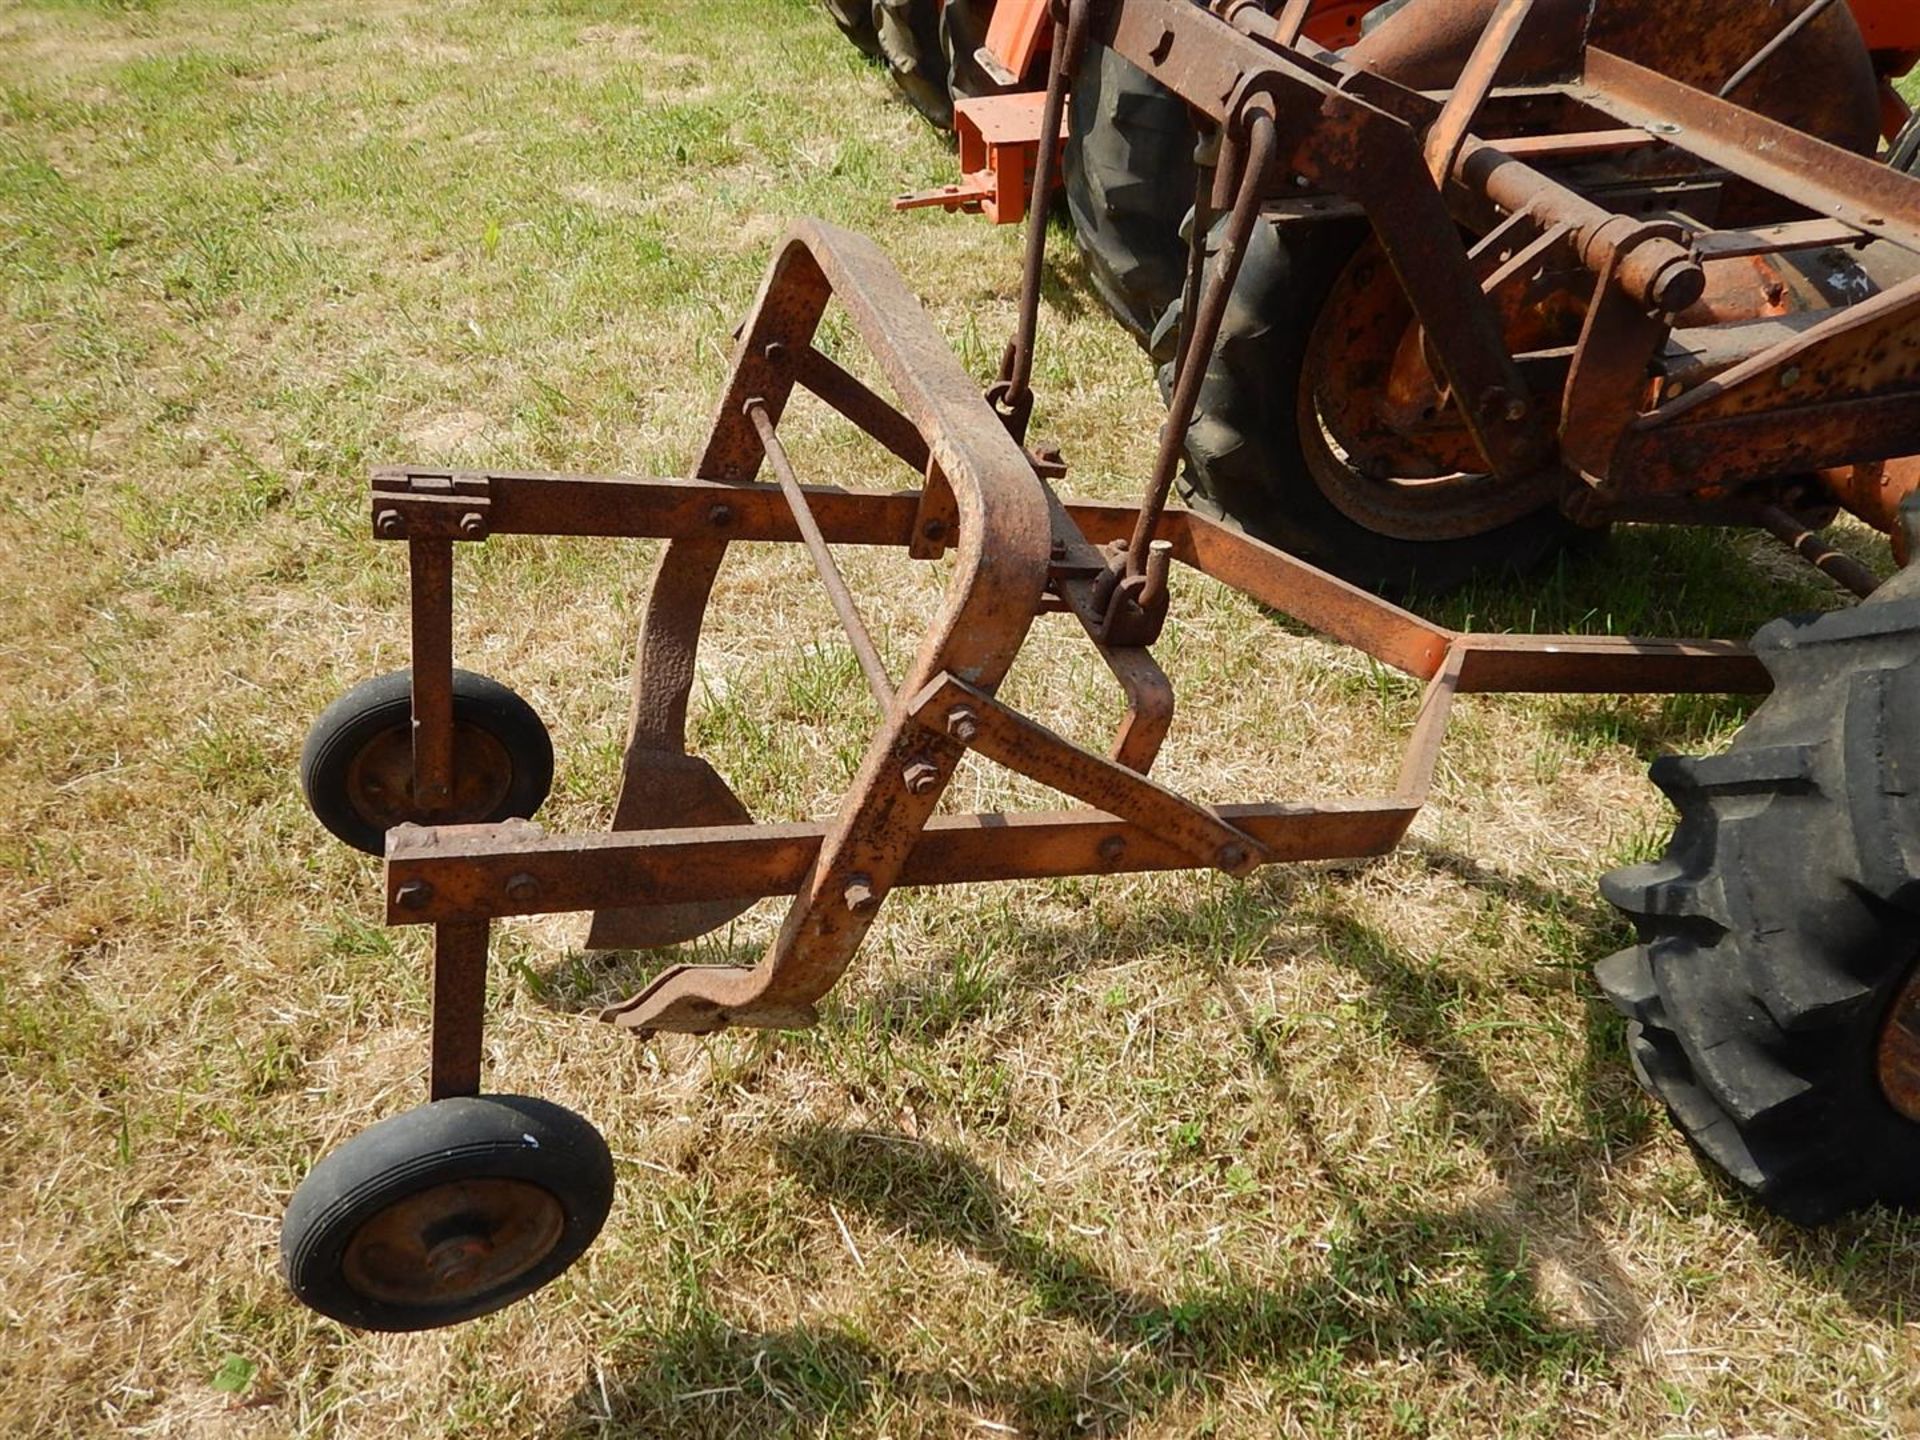 ALLIS CHALMERS Model B 4cylinder petrol/paraffin TRACTOR Reg. No. EAB 630 (expired) Fitted with an - Image 3 of 4